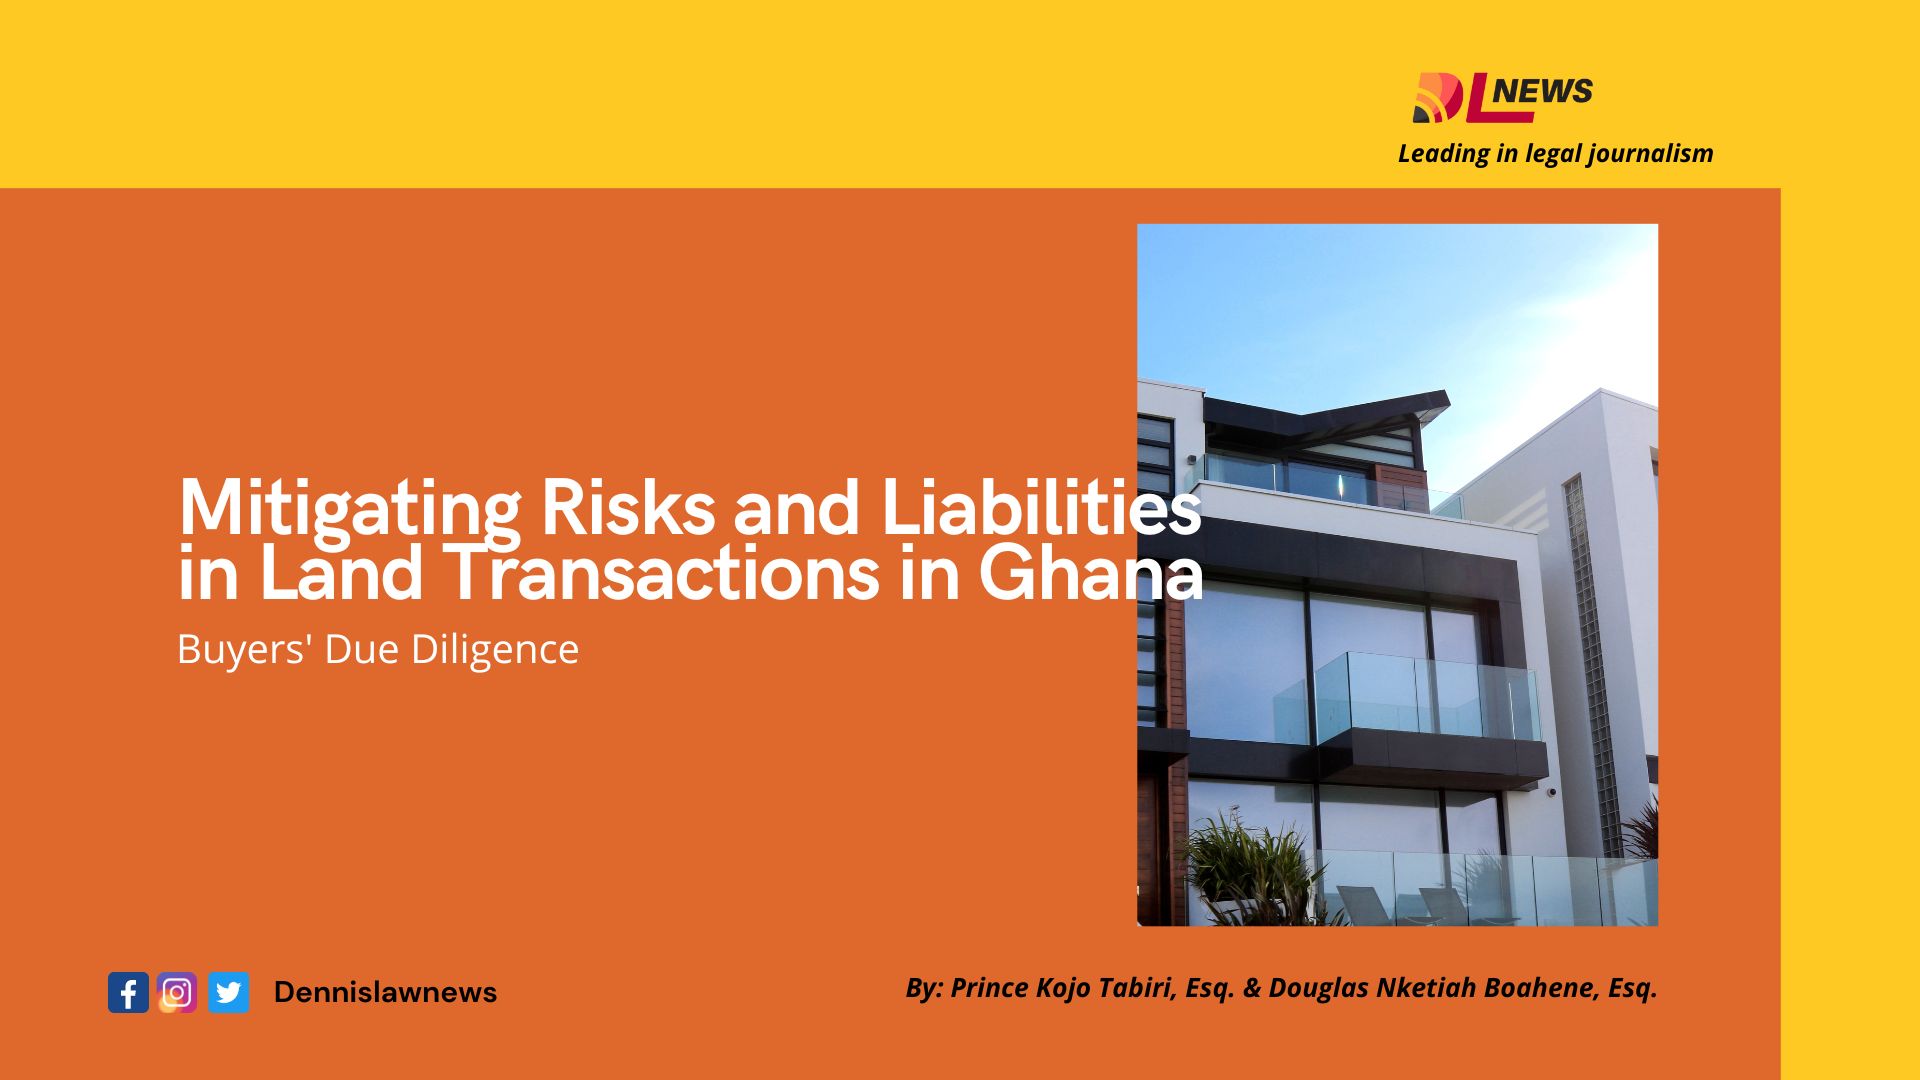 Mitigating Risks and Liabilities in Land Transactions in Ghana: Buyers' Due Diligence